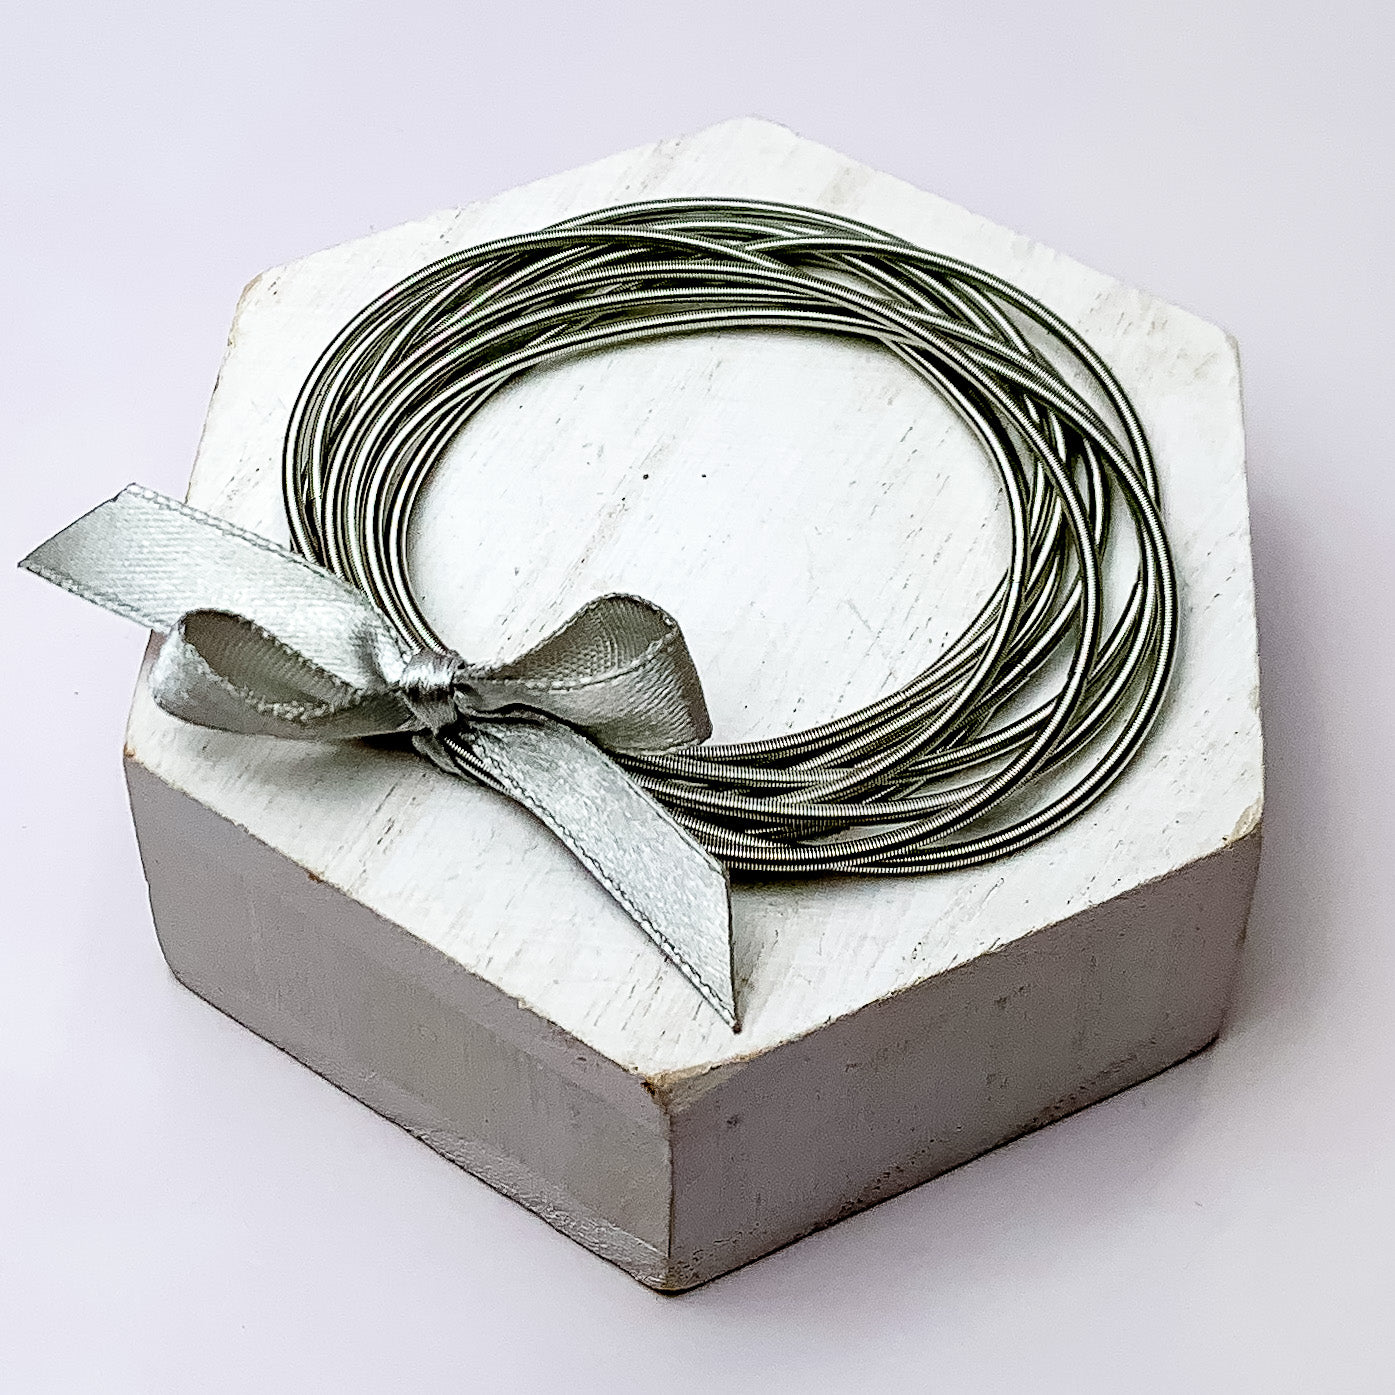 Guitar String Bracelets with Bow in Grey. Pictured on a white background sitting on top of a white block.